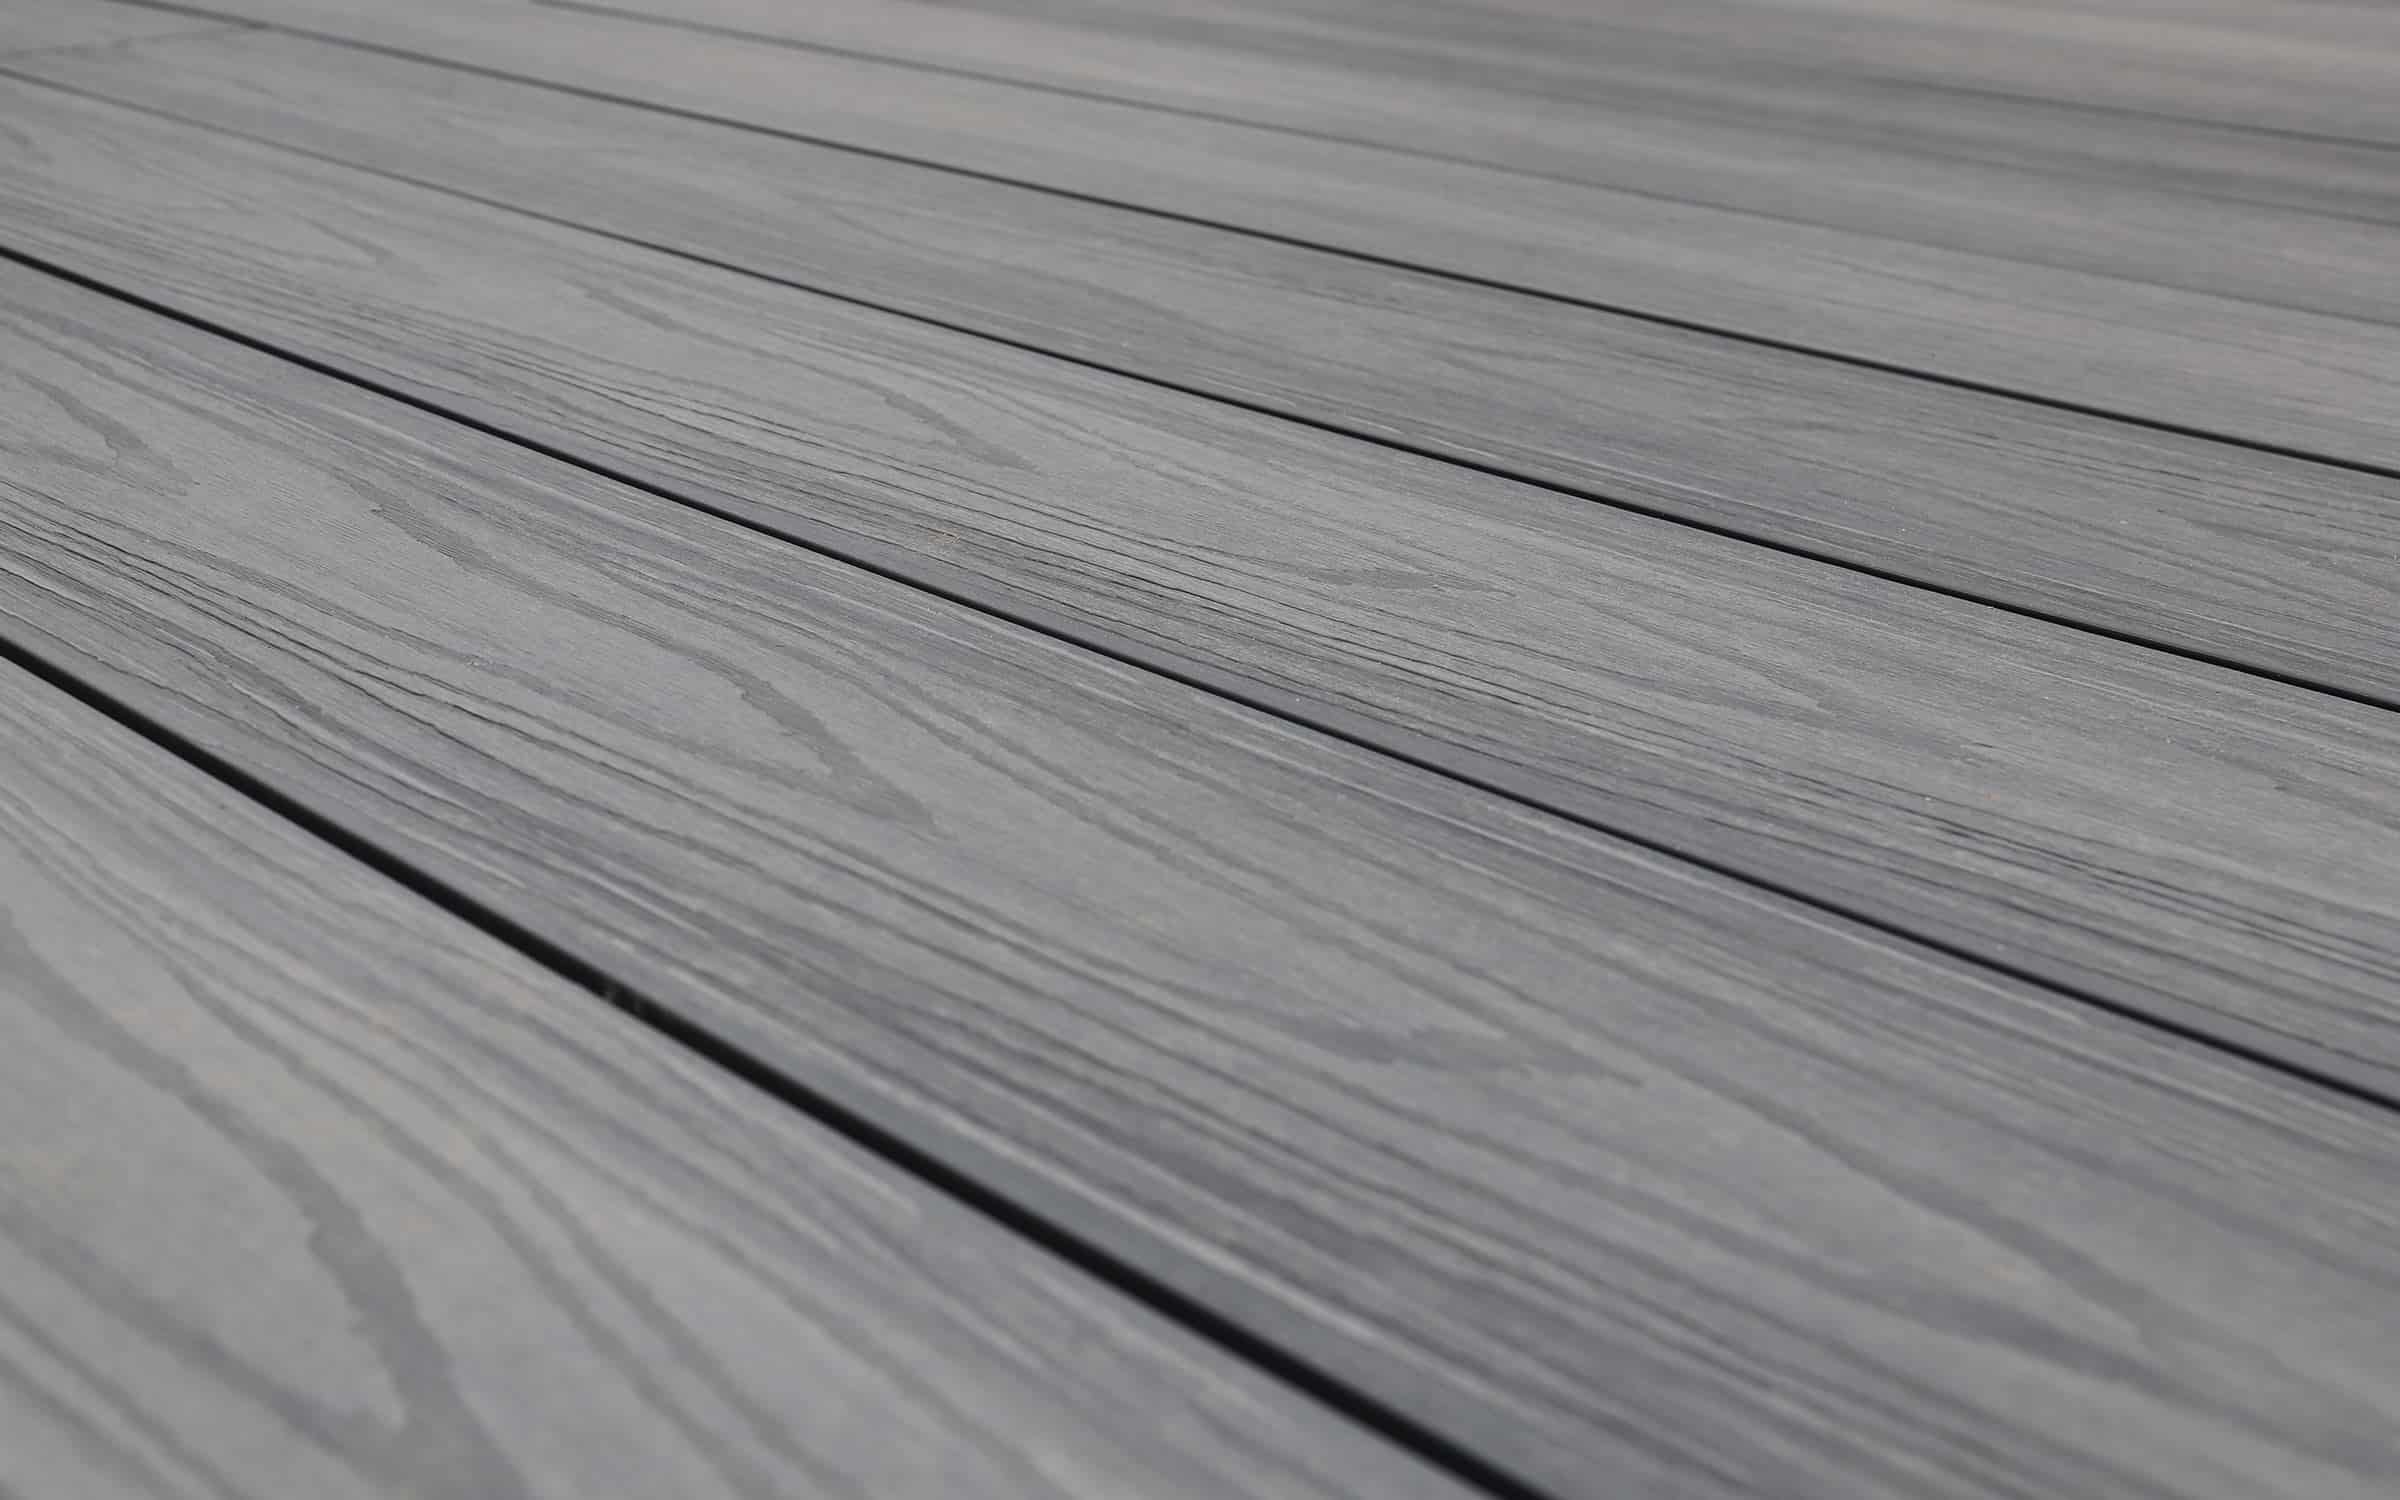 NeoTimber Composite Decking Advanced